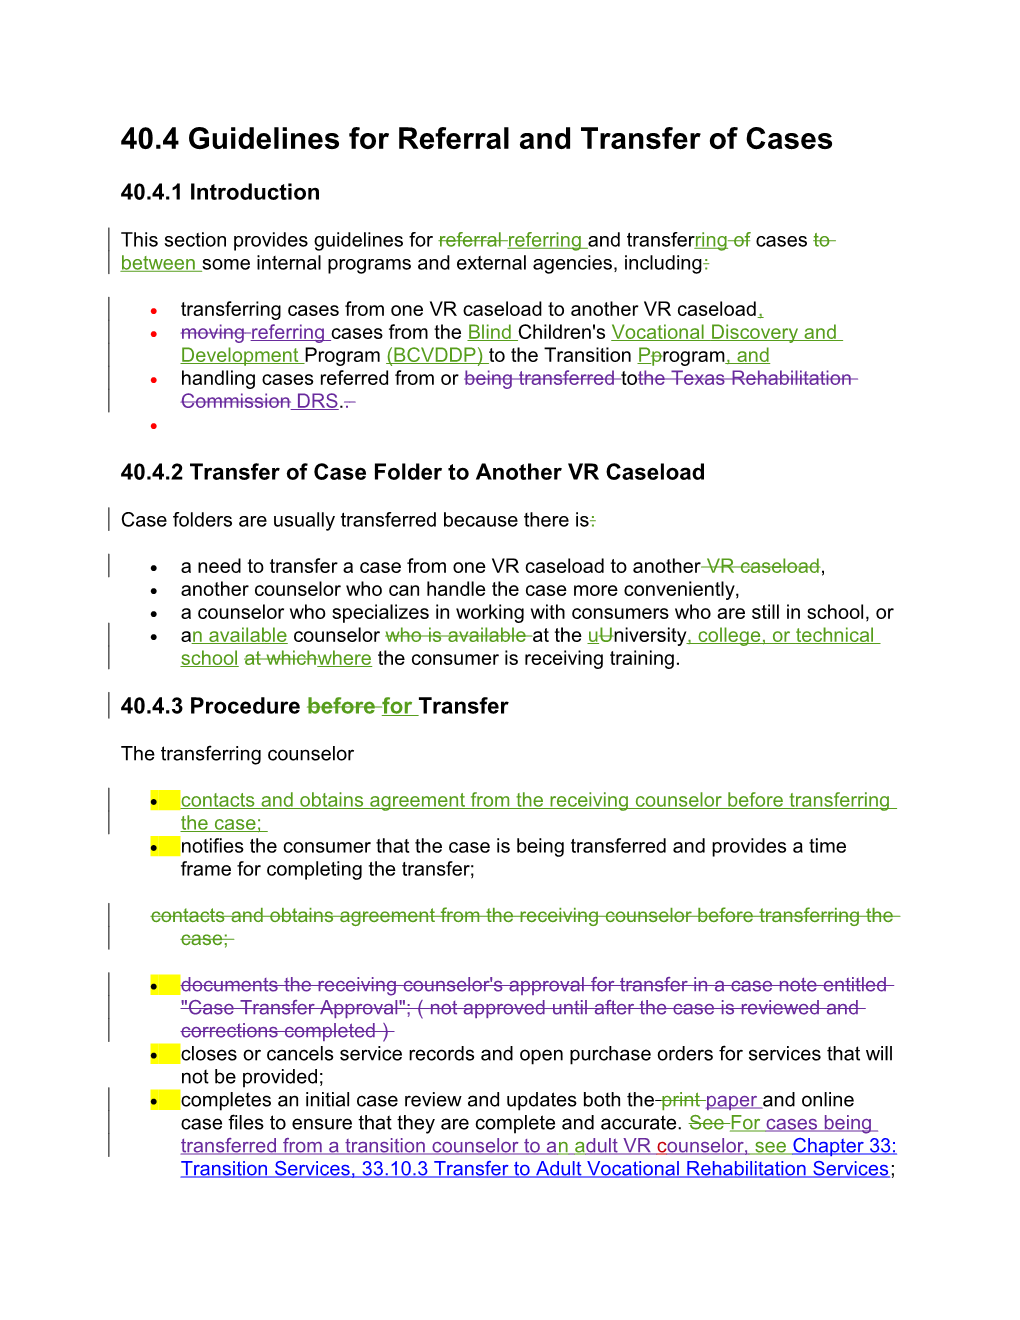 40.4 Guidelines for Referral and Transfer of Cases